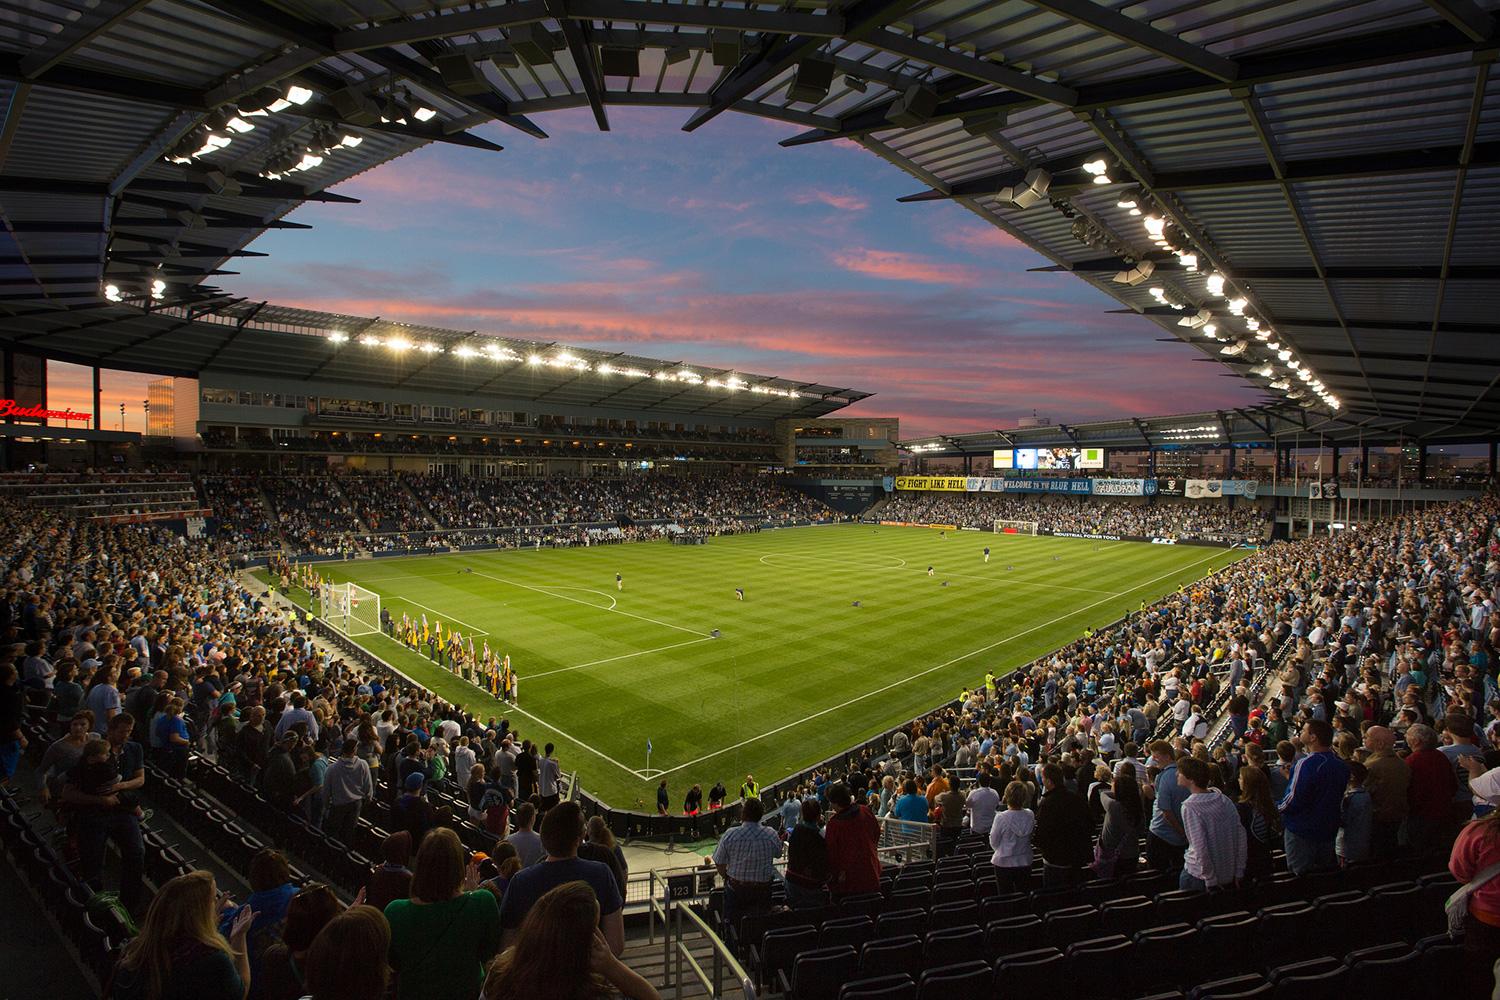 Sporting Park in Kansas City home to the MLS club Sporting KC is a